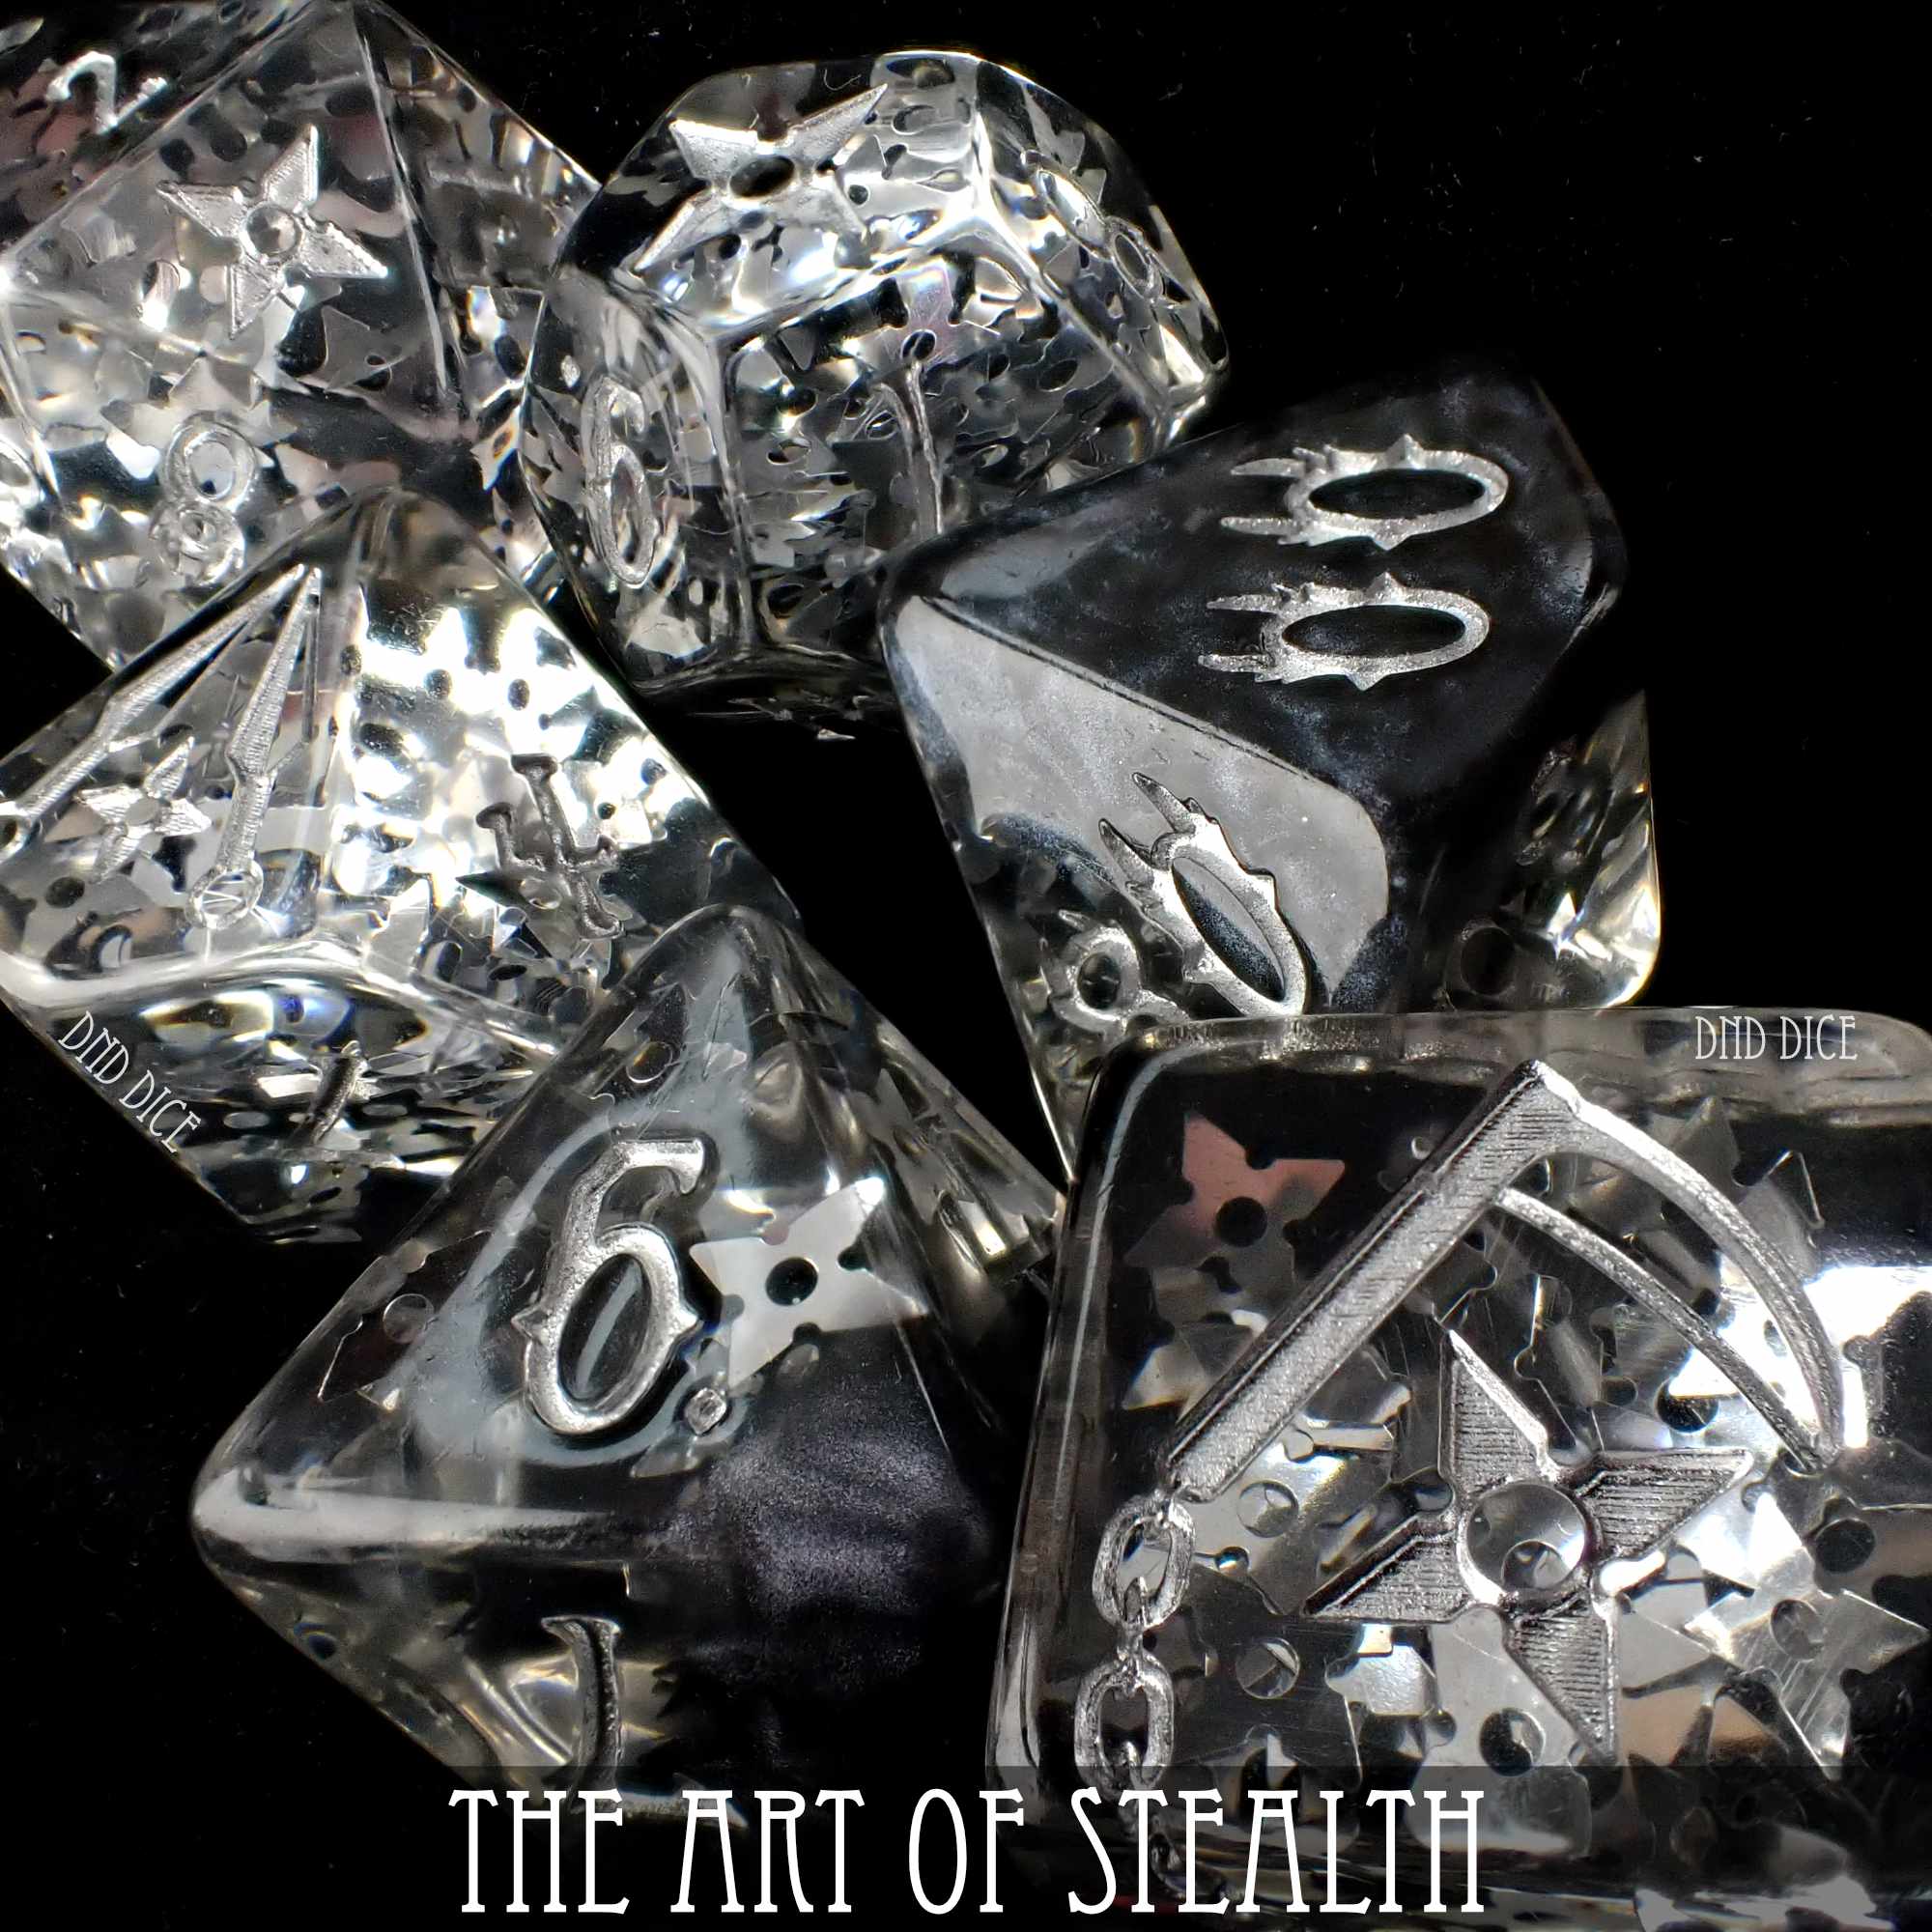 The Art of Stealth 11 Dice Set